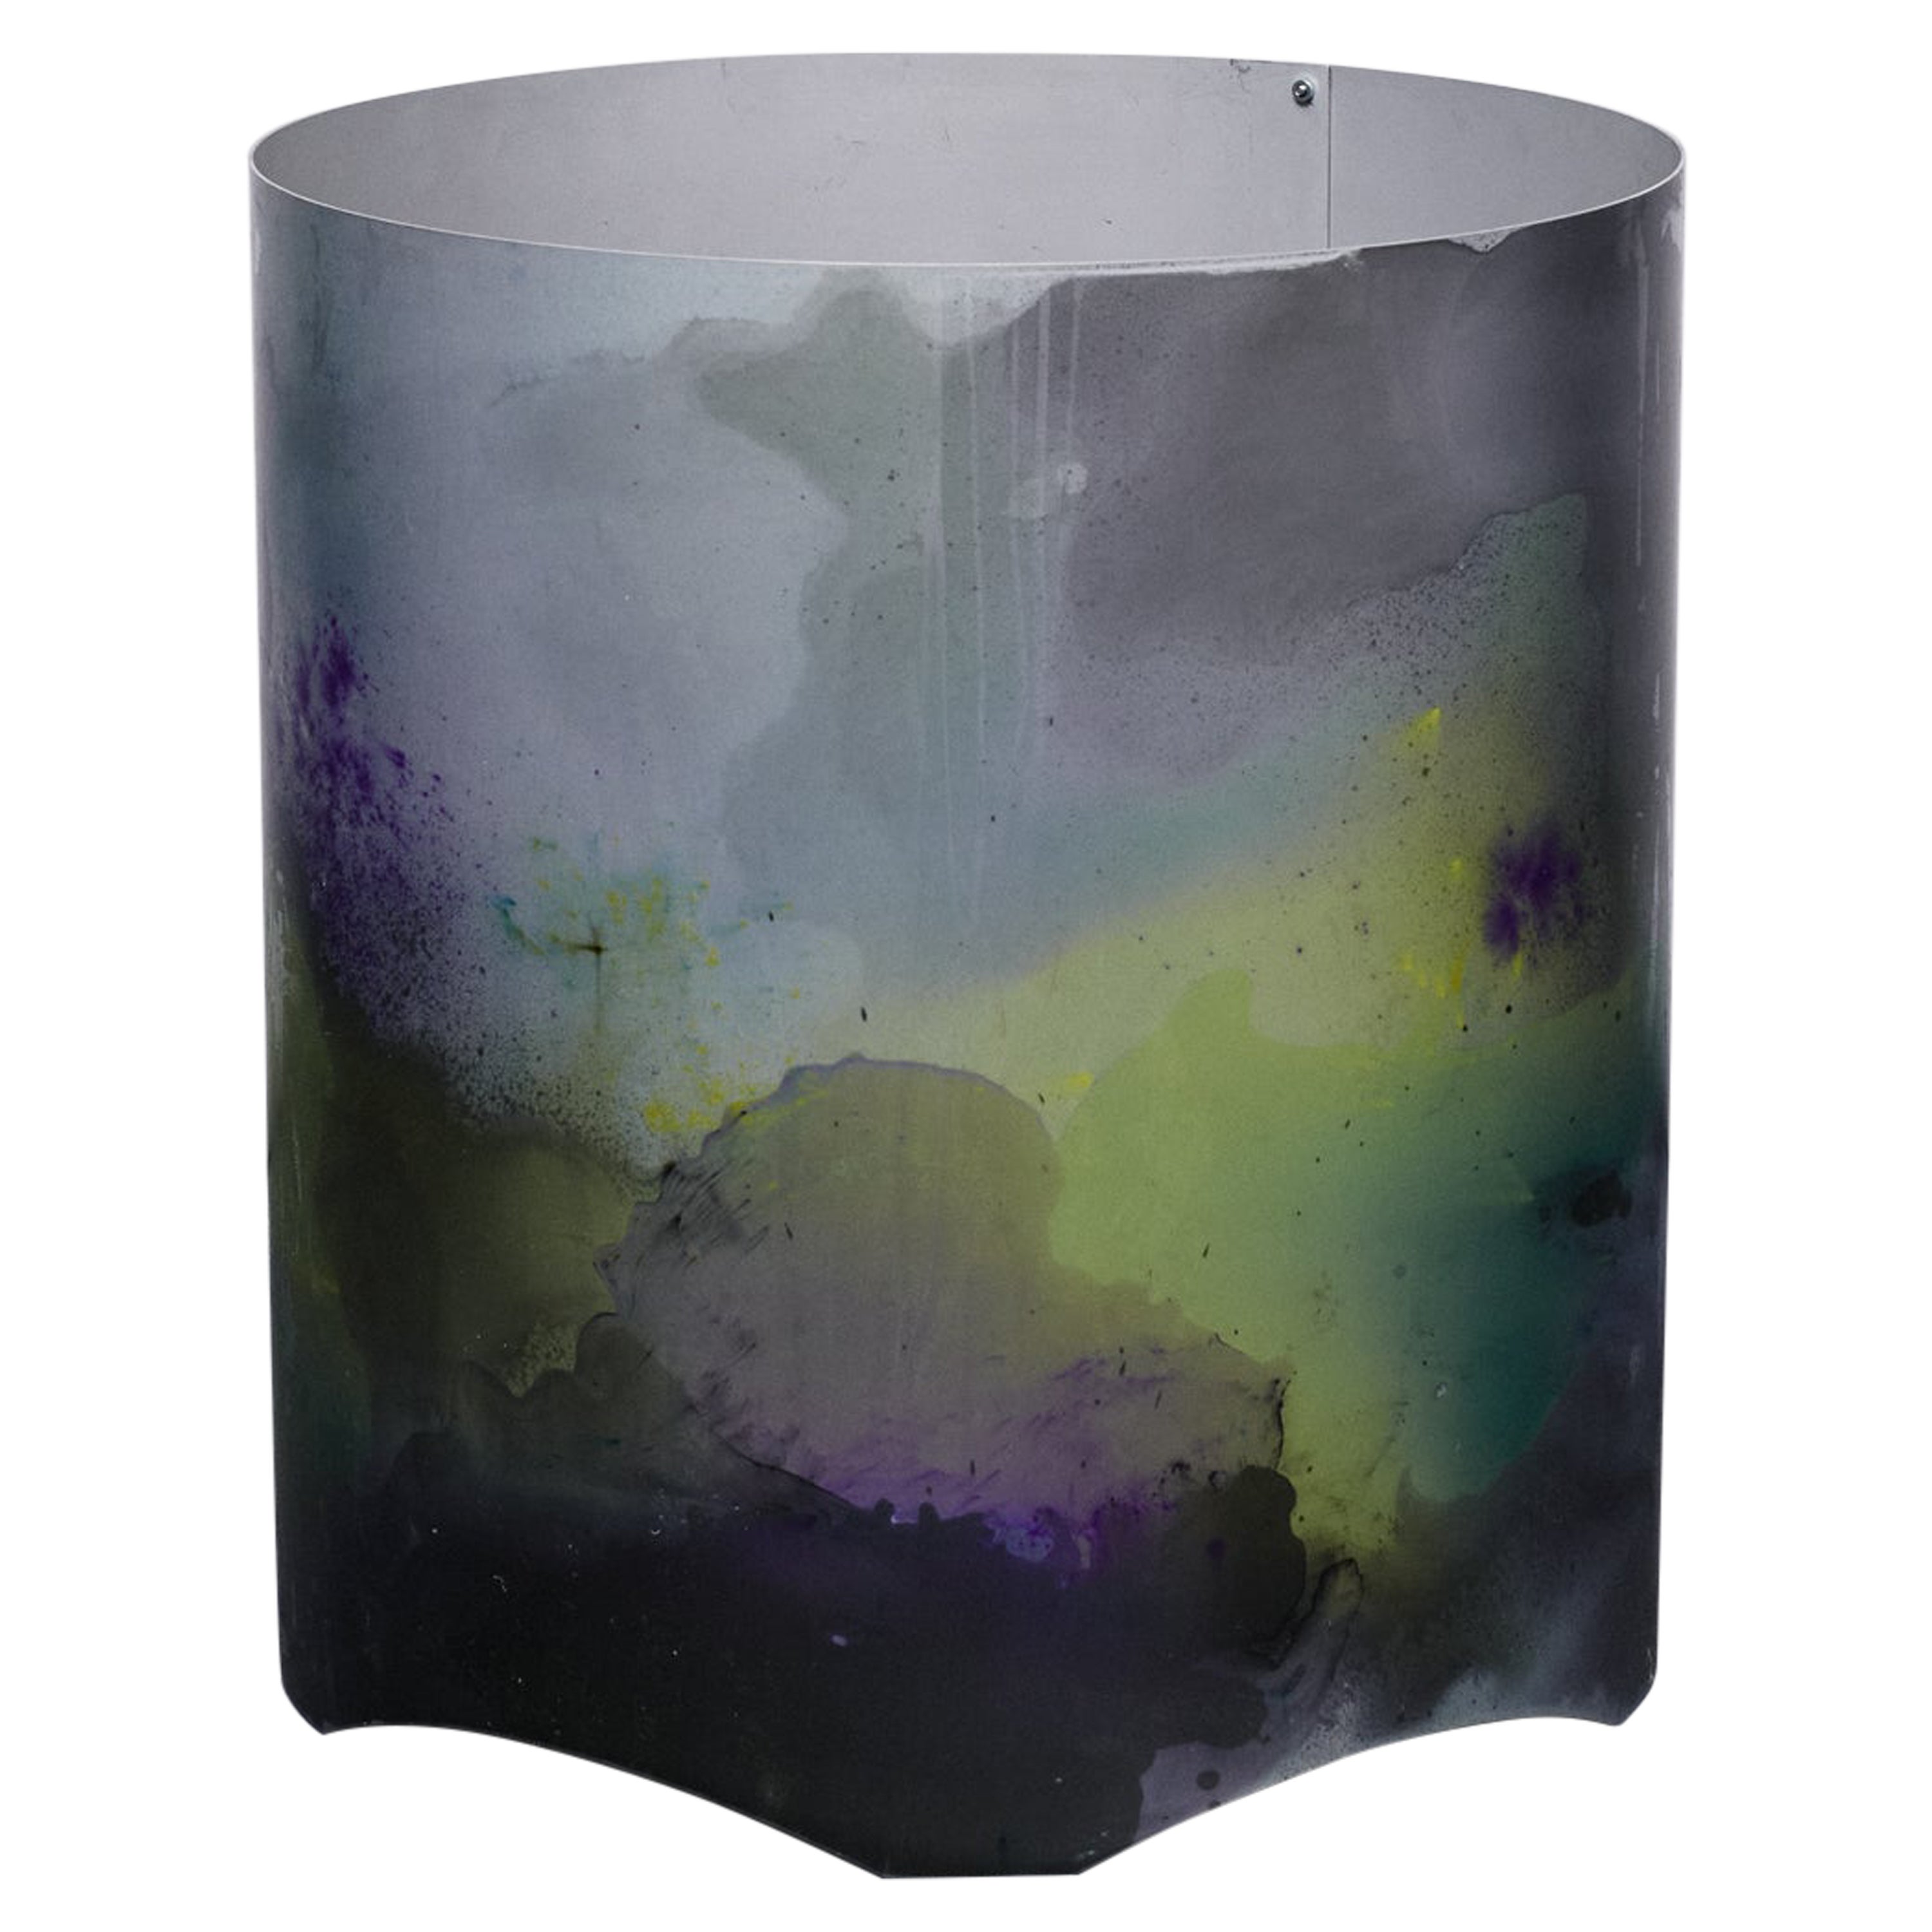 Anodised Aluminium Planter / Vessel Multi-Coloured from Cosmos collection For Sale